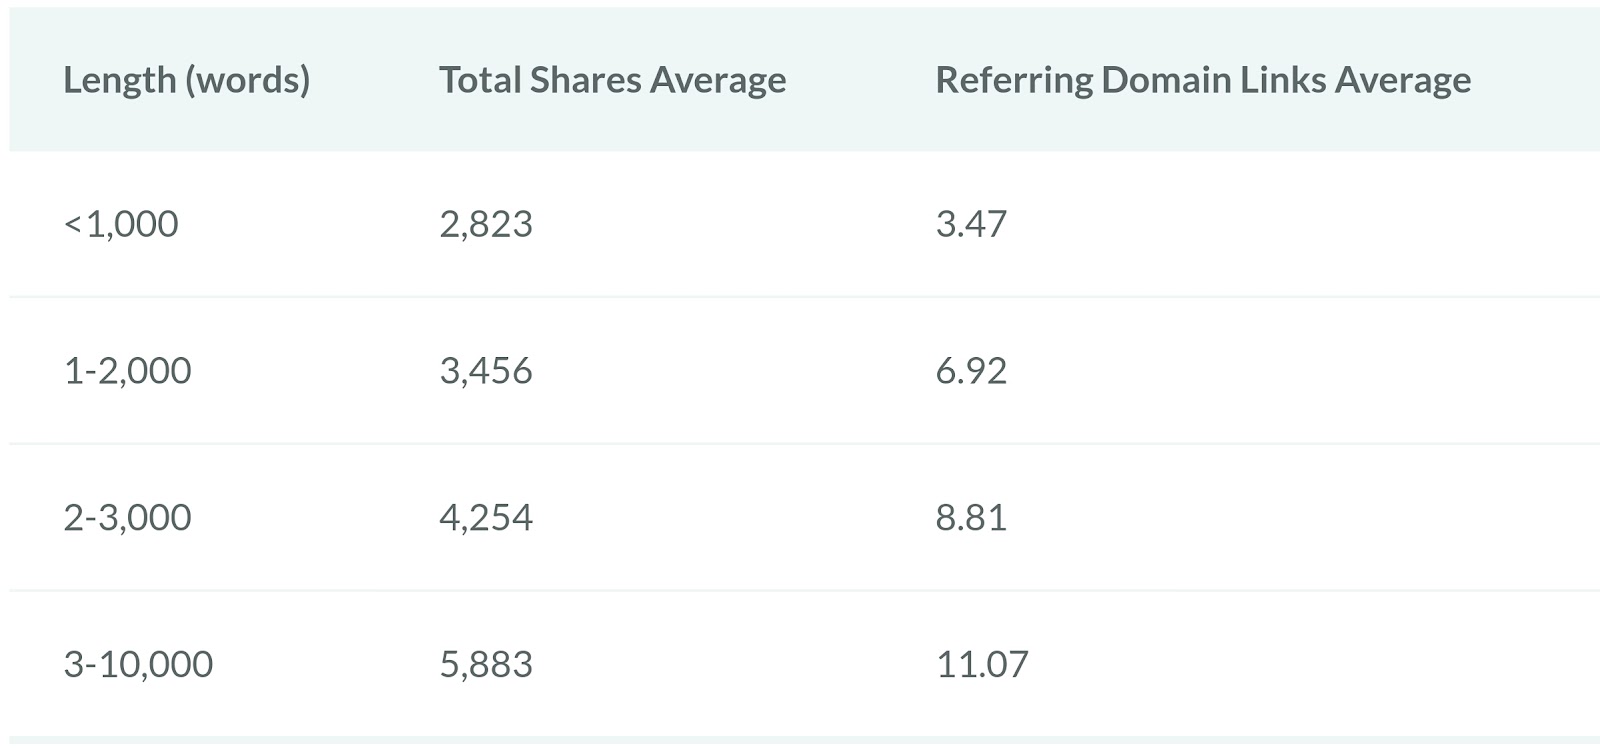 length of post is correlated to high number of shares and backlinks